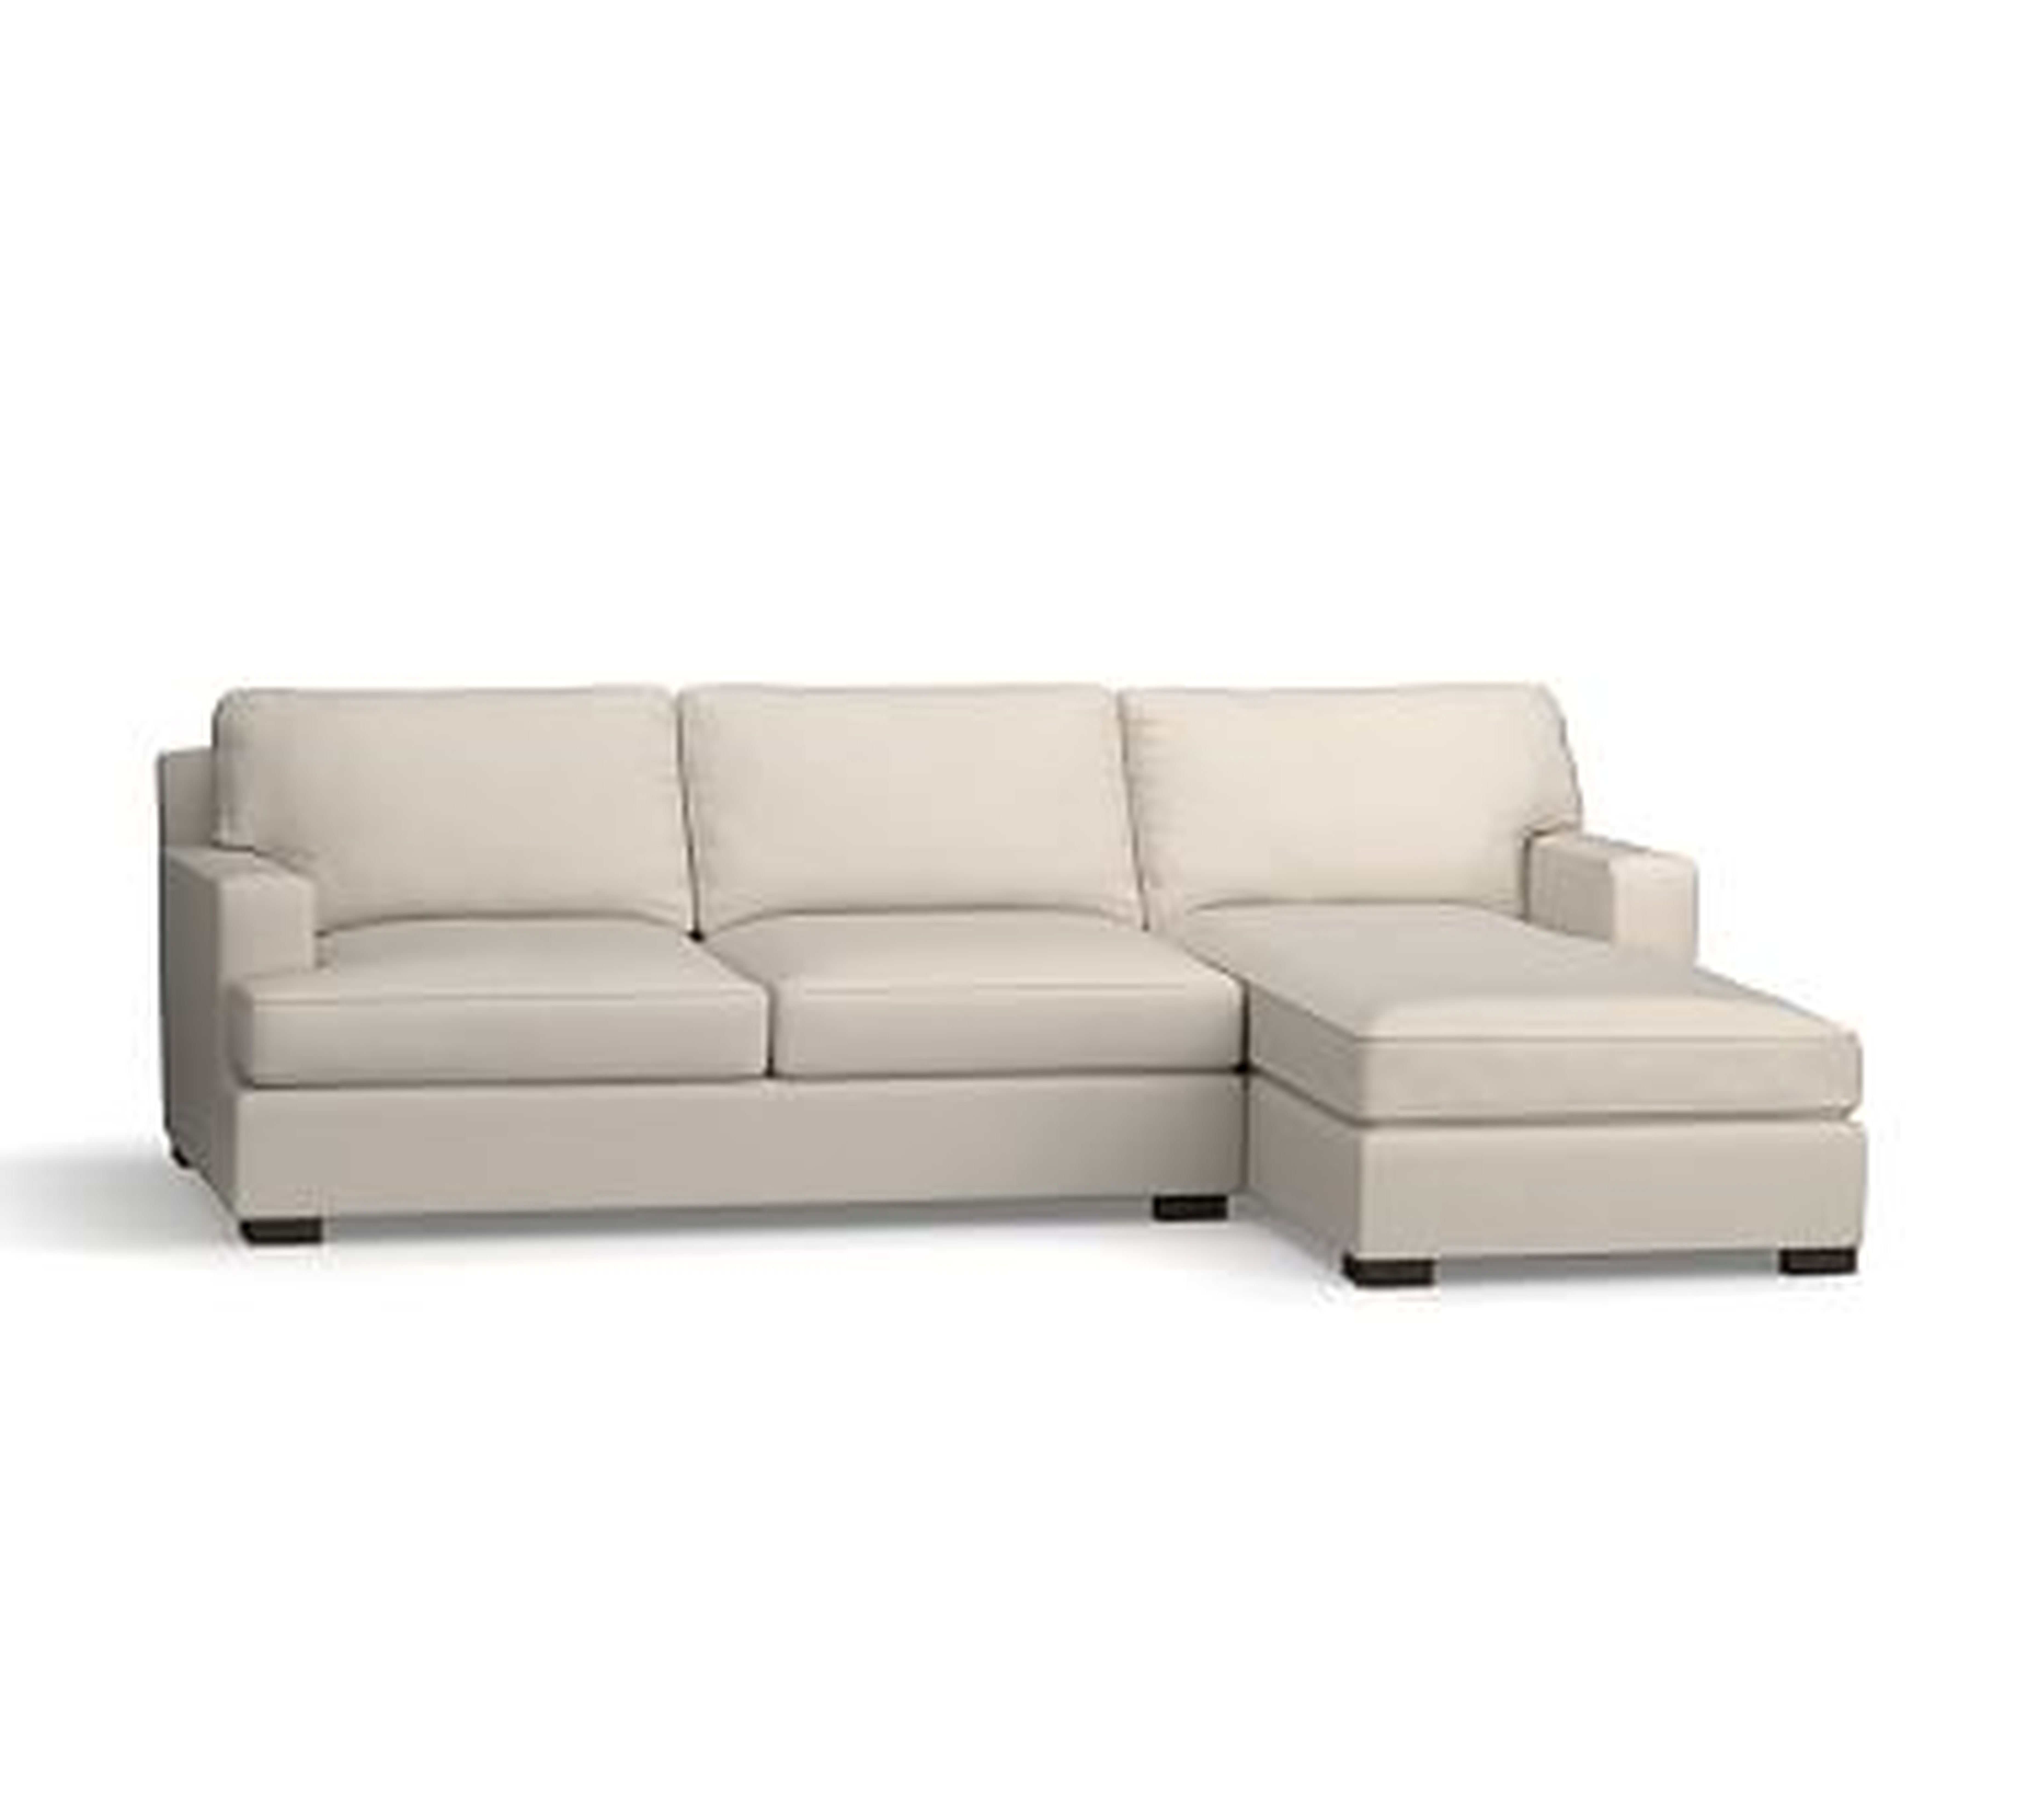 Townsend Square Arm Upholstered Left Arm Sofa with Chaise Sectional, Polyester Wrapped Cushions, Performance Everydaysuede(TM) Stone - Pottery Barn